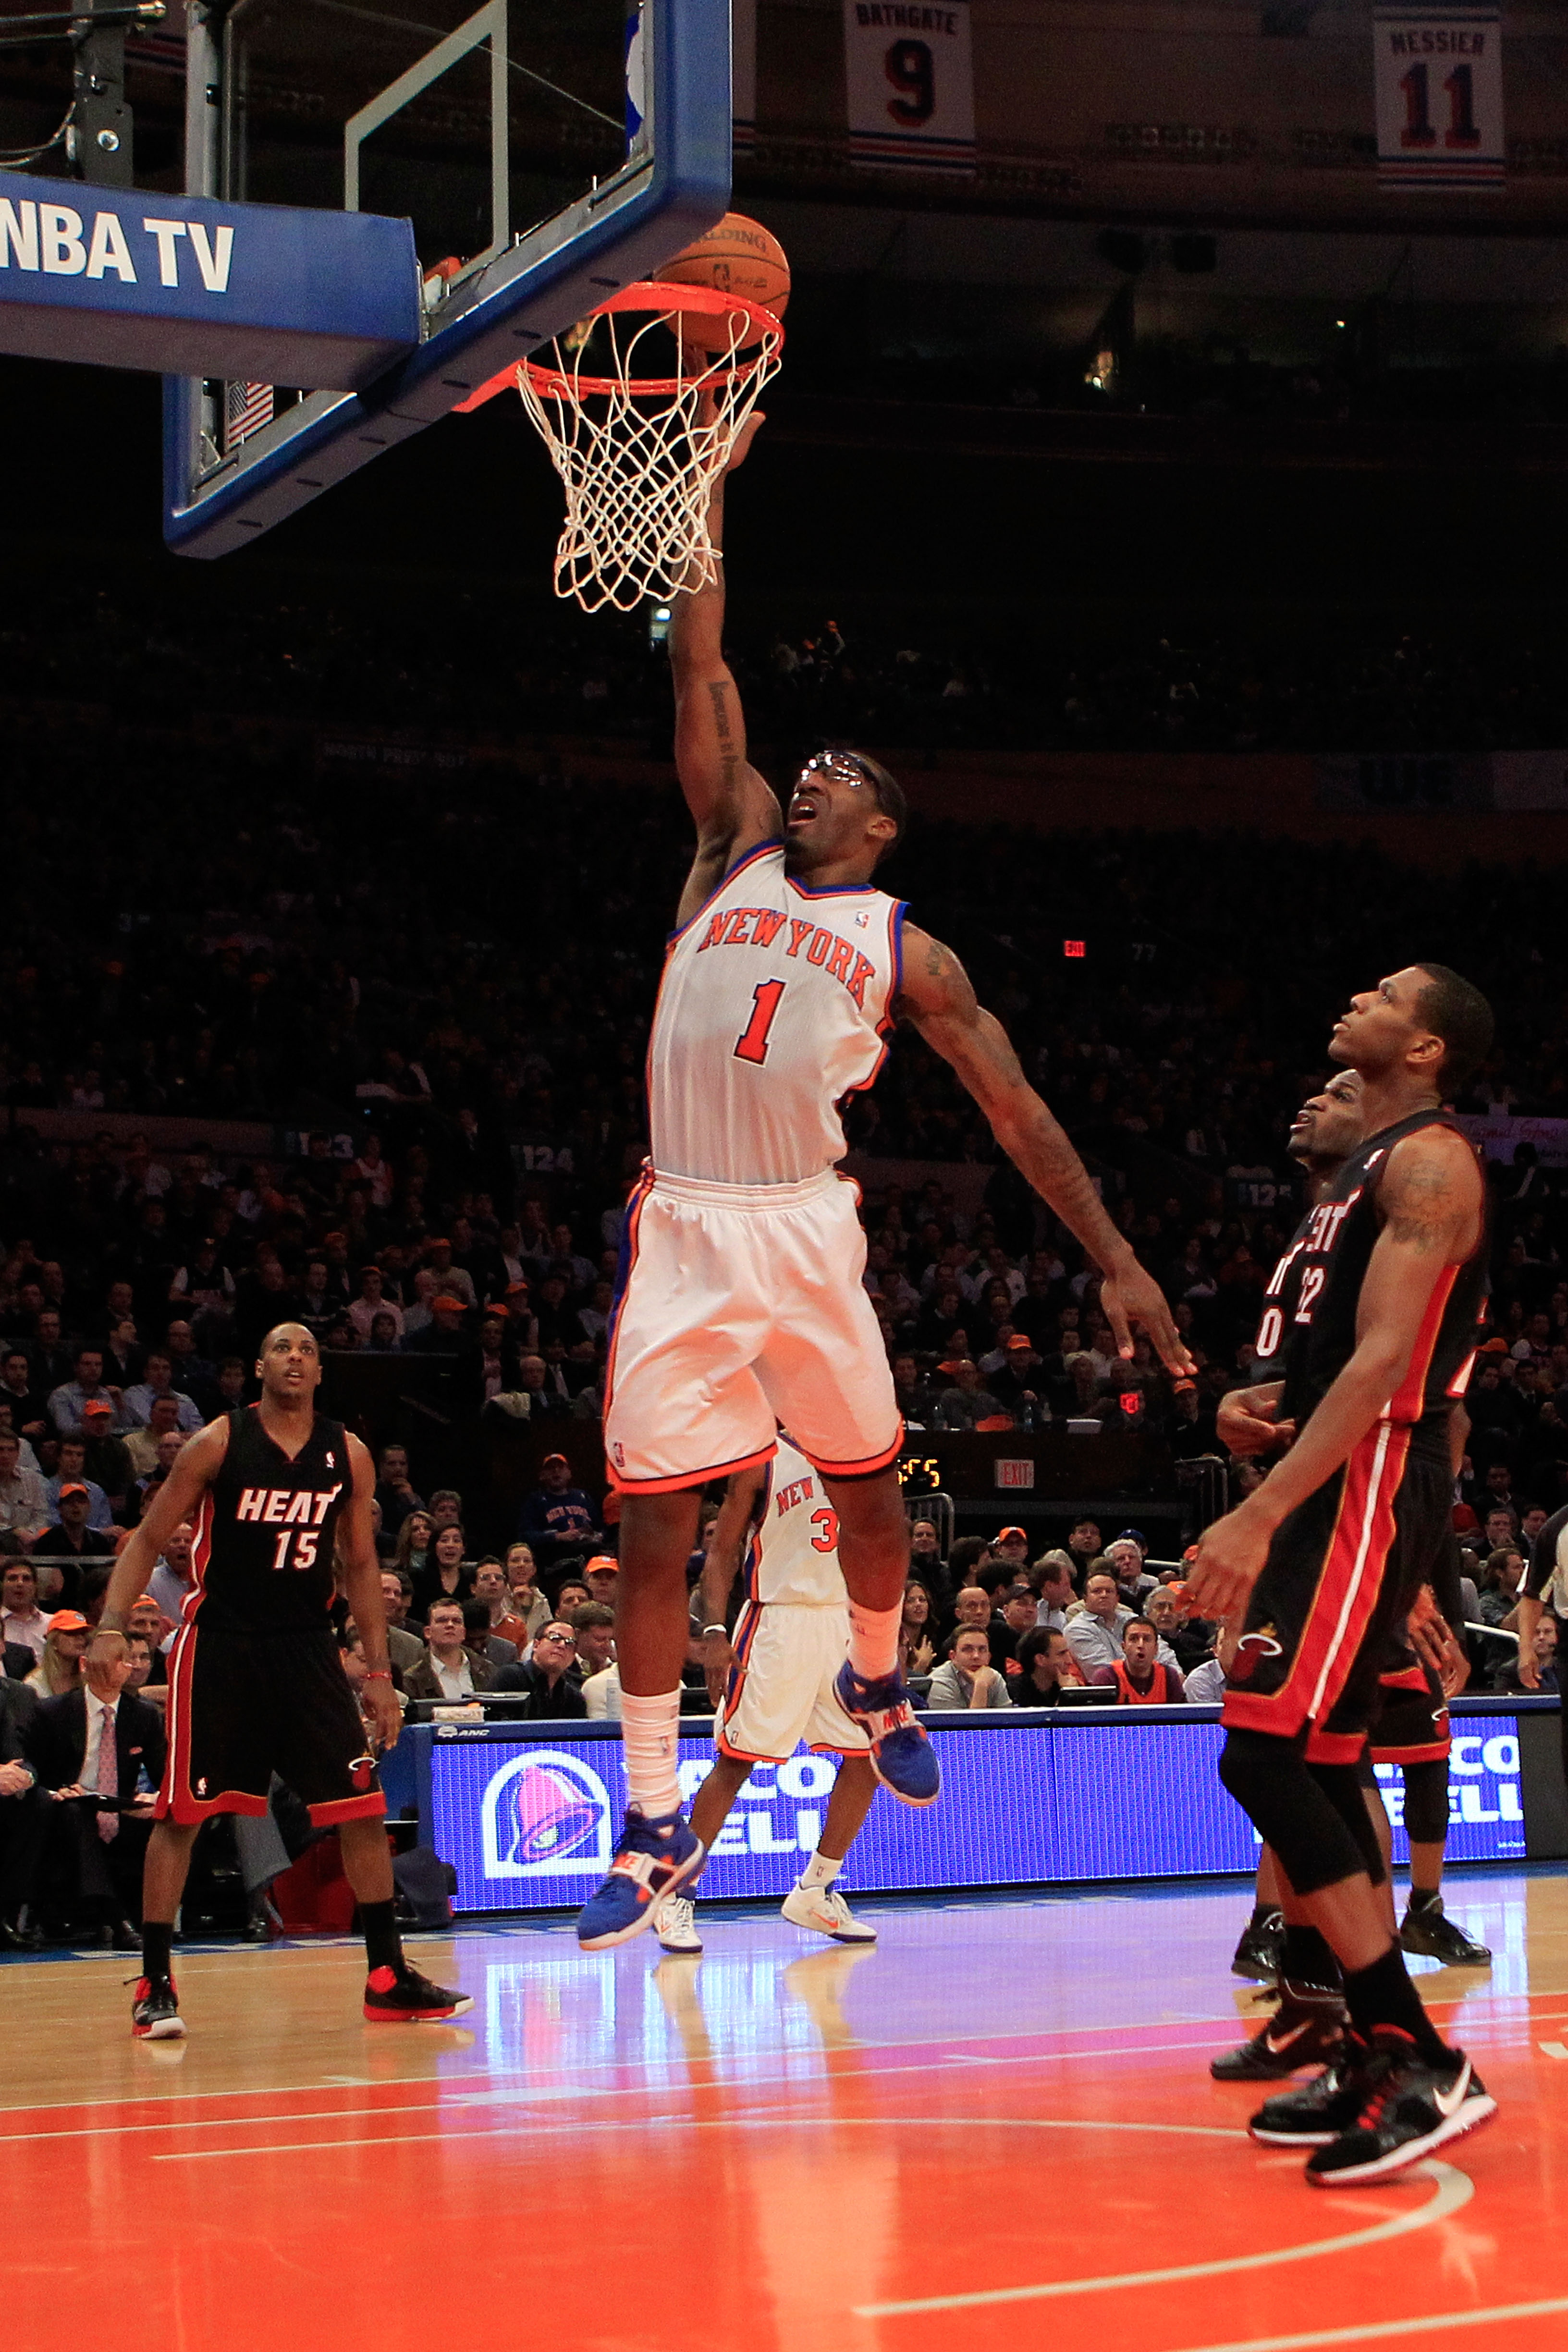 Photo: New York Knicks Amar'e Stoudemire dunks at Madison Square Garden in  New York - NYP20110124108 